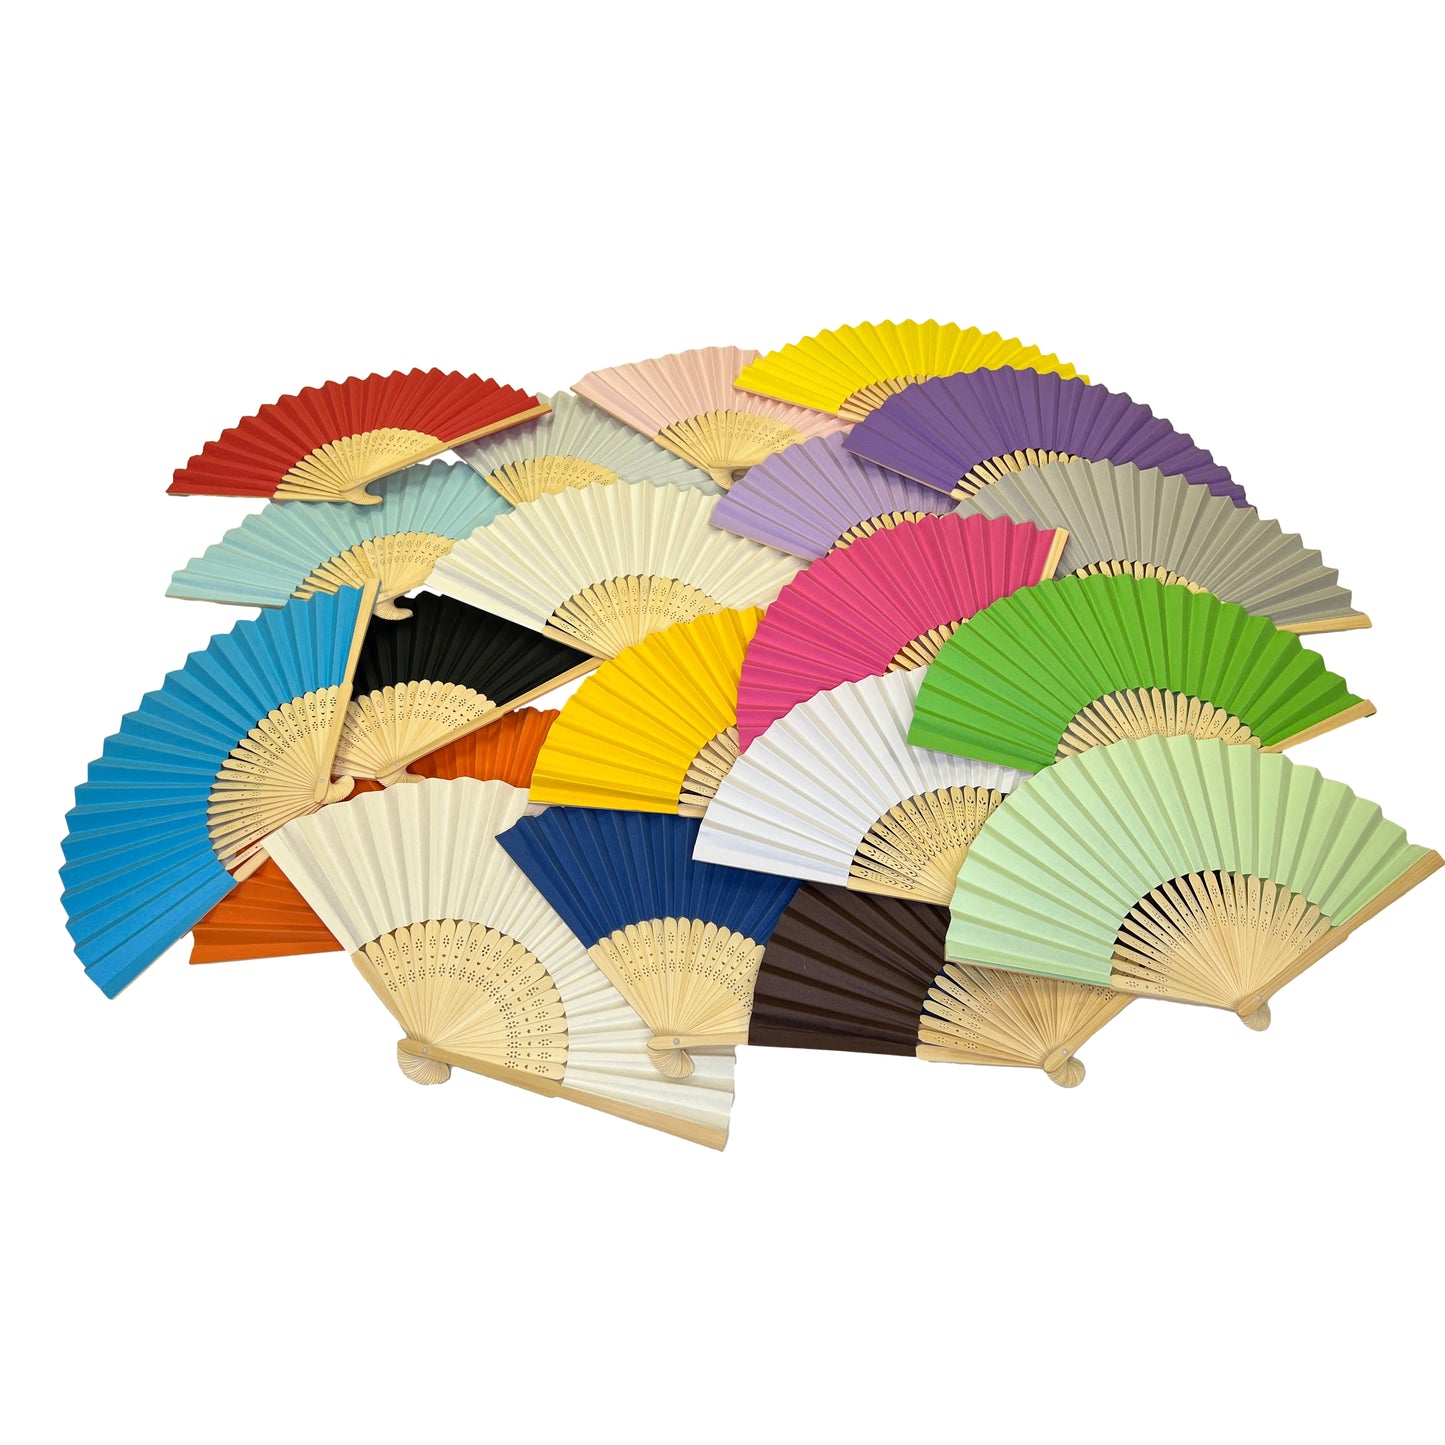 Pack of 10 Dark Pink Paper Foldable Hand Held Bamboo Wooden Fans by Parev